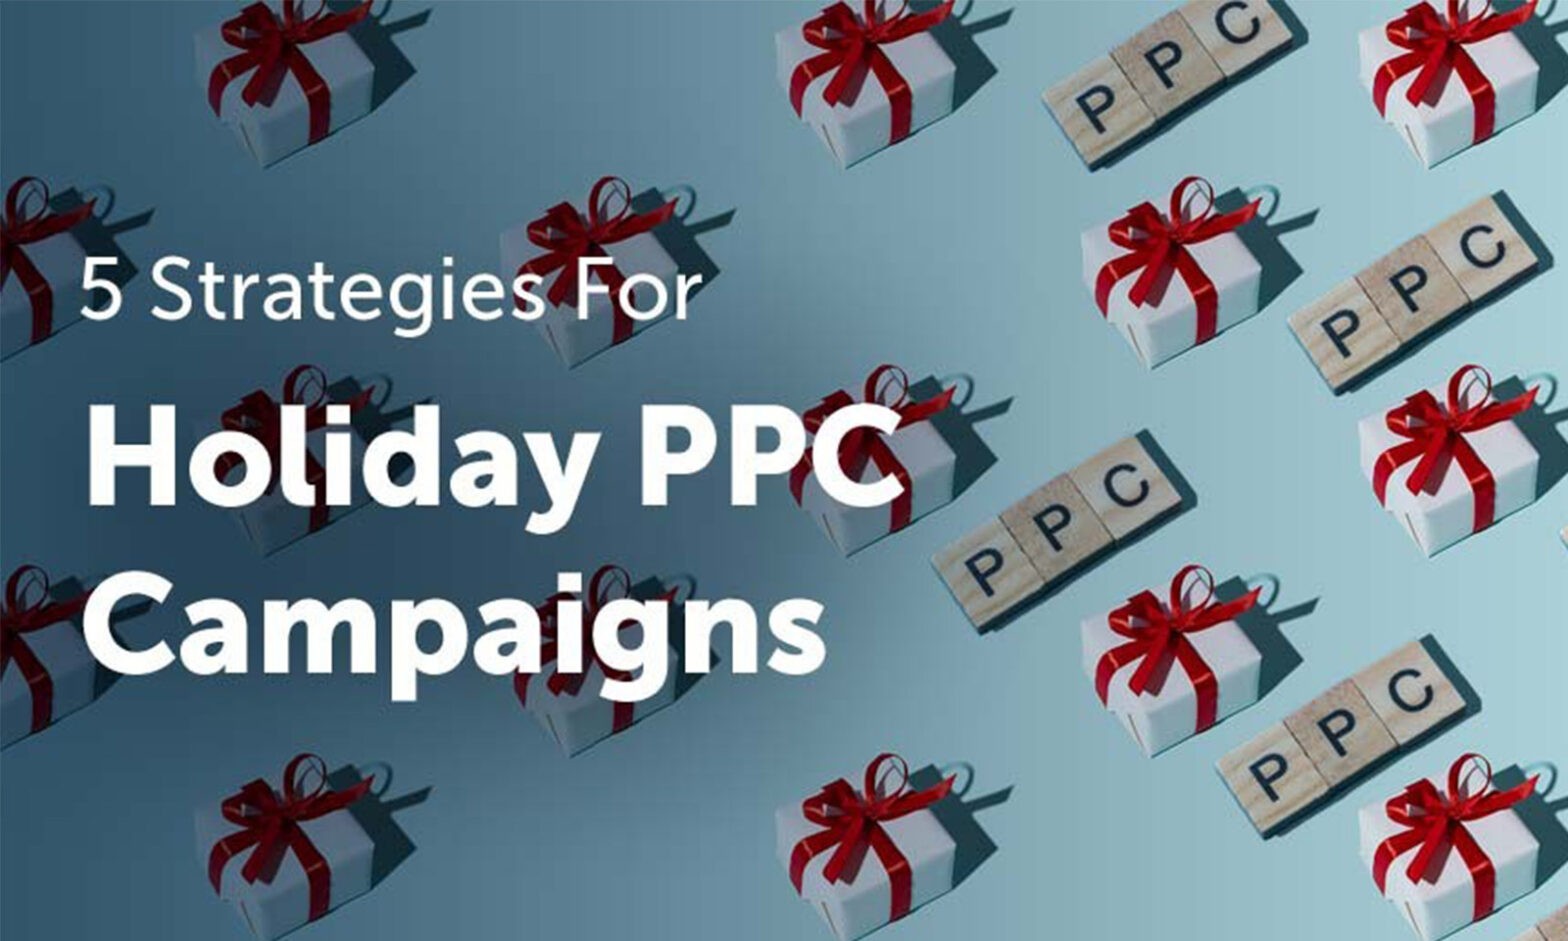 5 Strategies for High-Performing Holiday PPC Campaigns